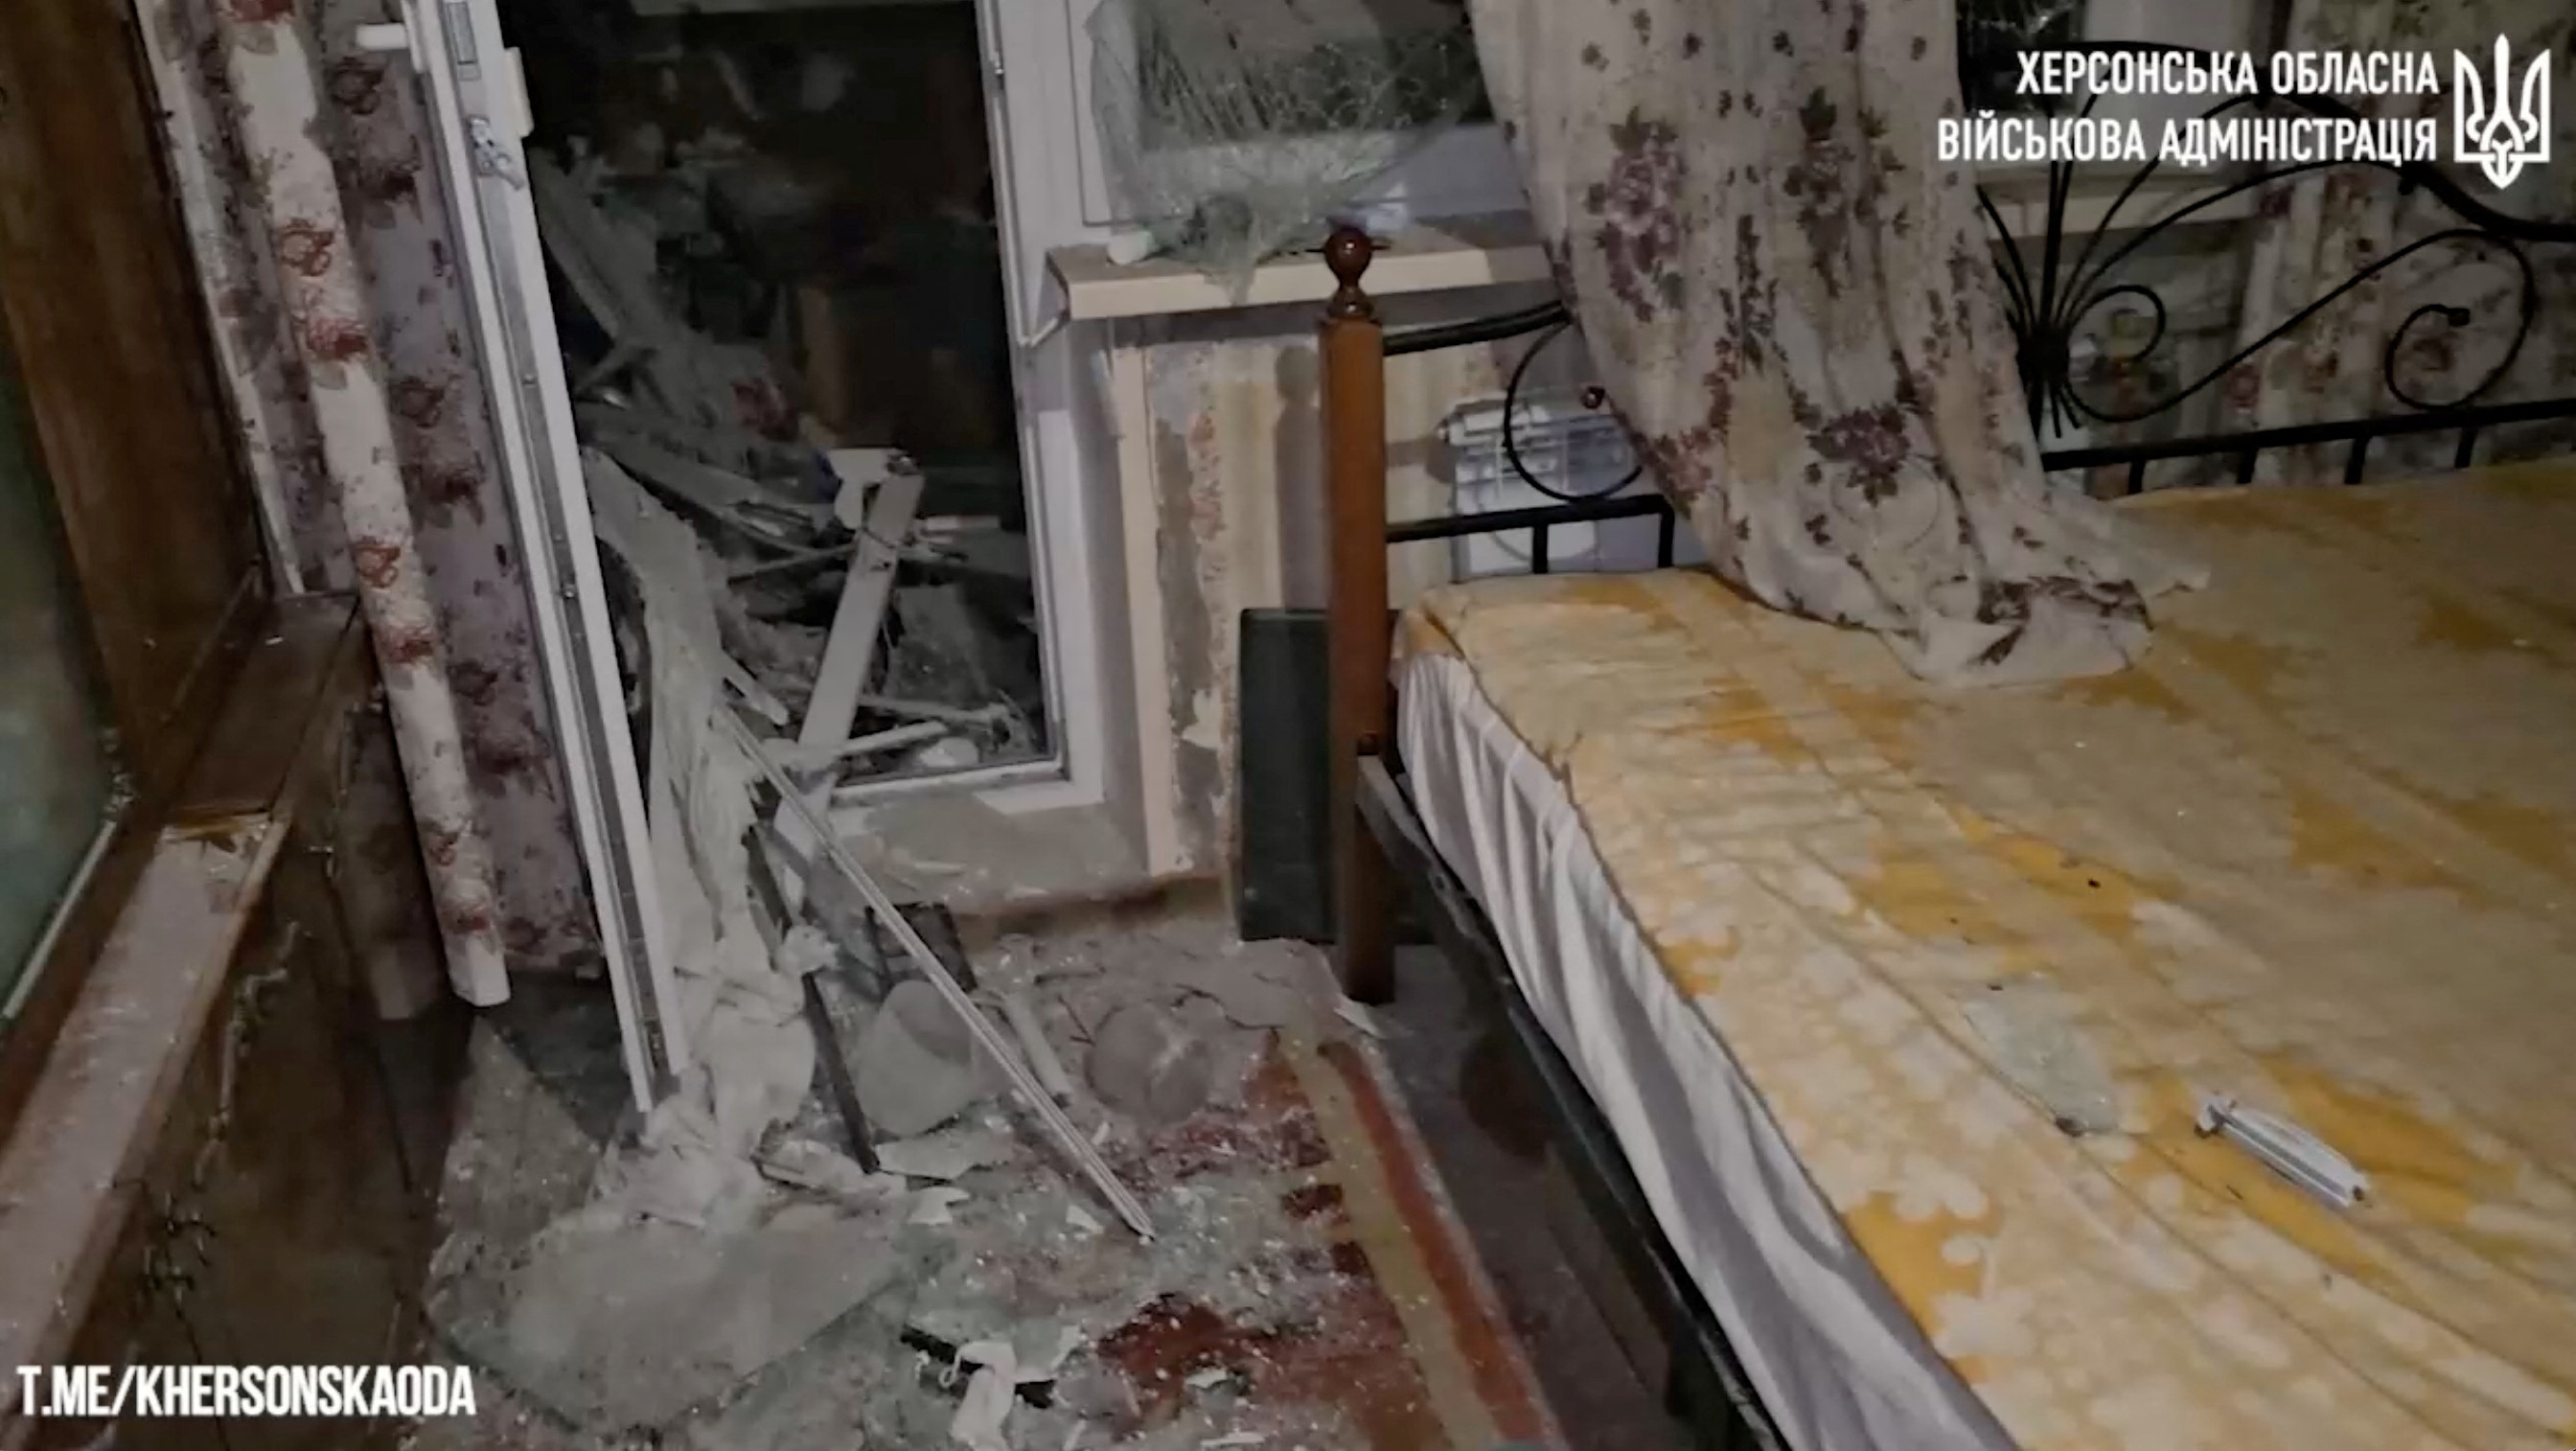 One killed, seven wounded after Russia shells Kherson - Ukraine officials